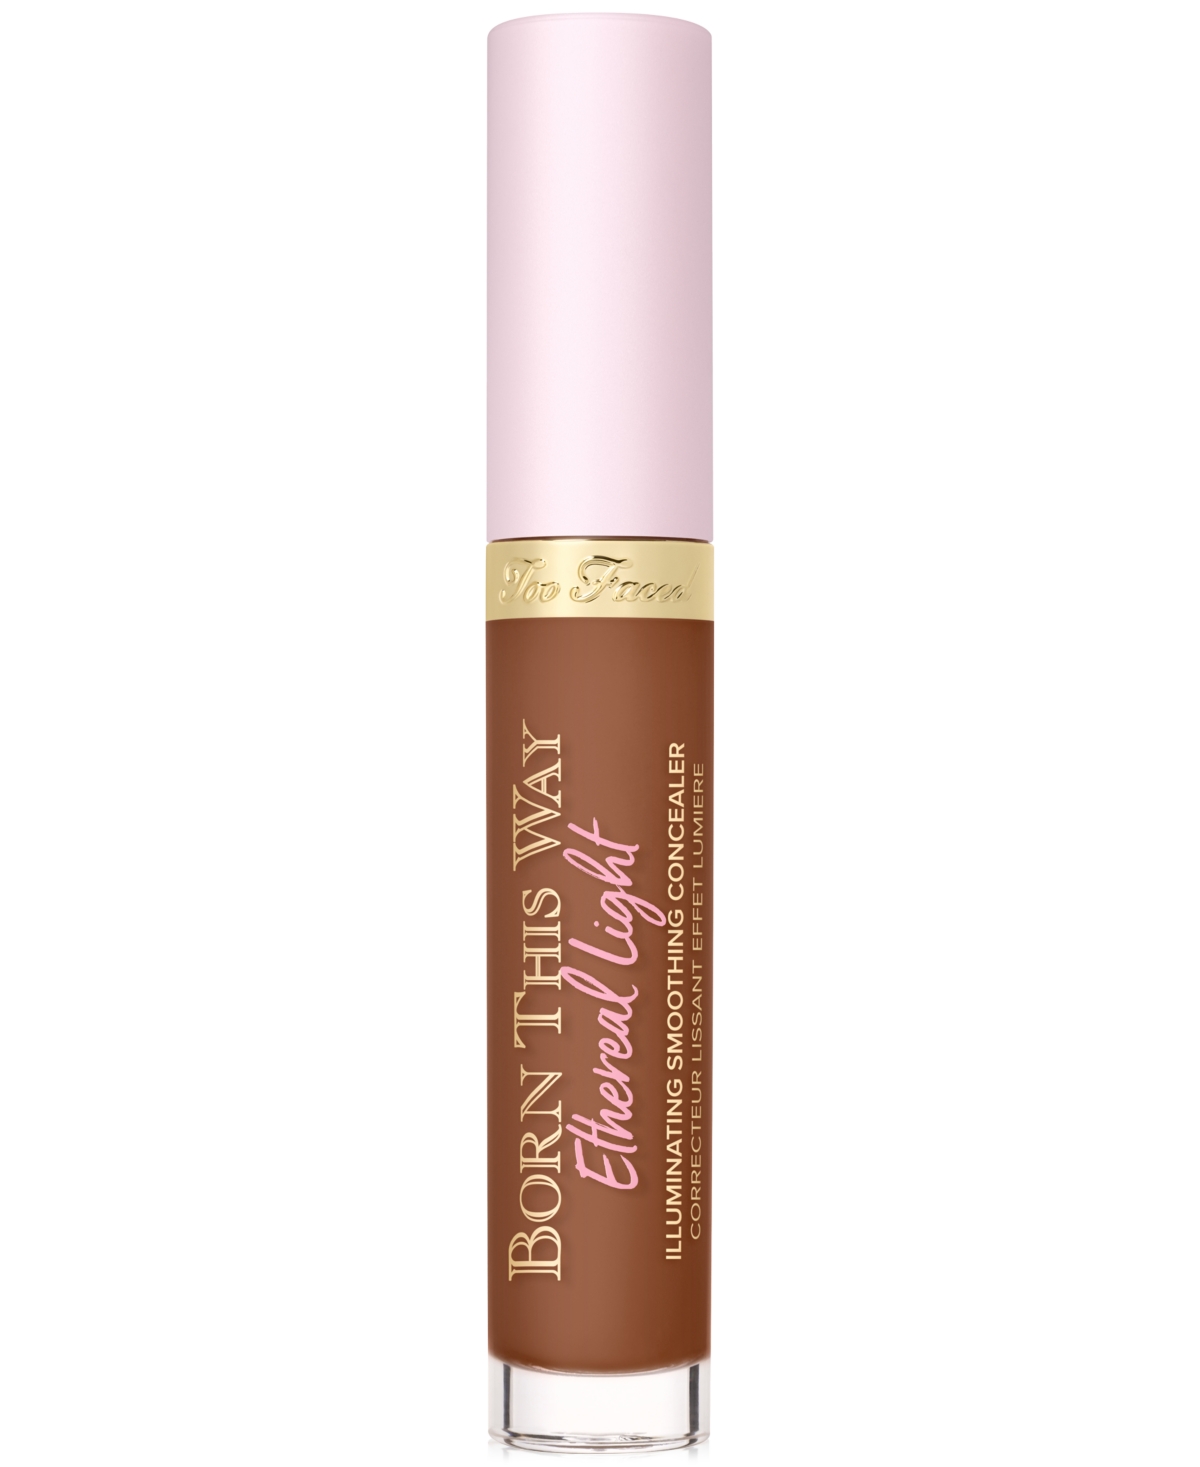 Too Faced Born This Way Ethereal Light Illuminating Smoothing Concealer In Milk Chocolate - Very Deep With Neutral